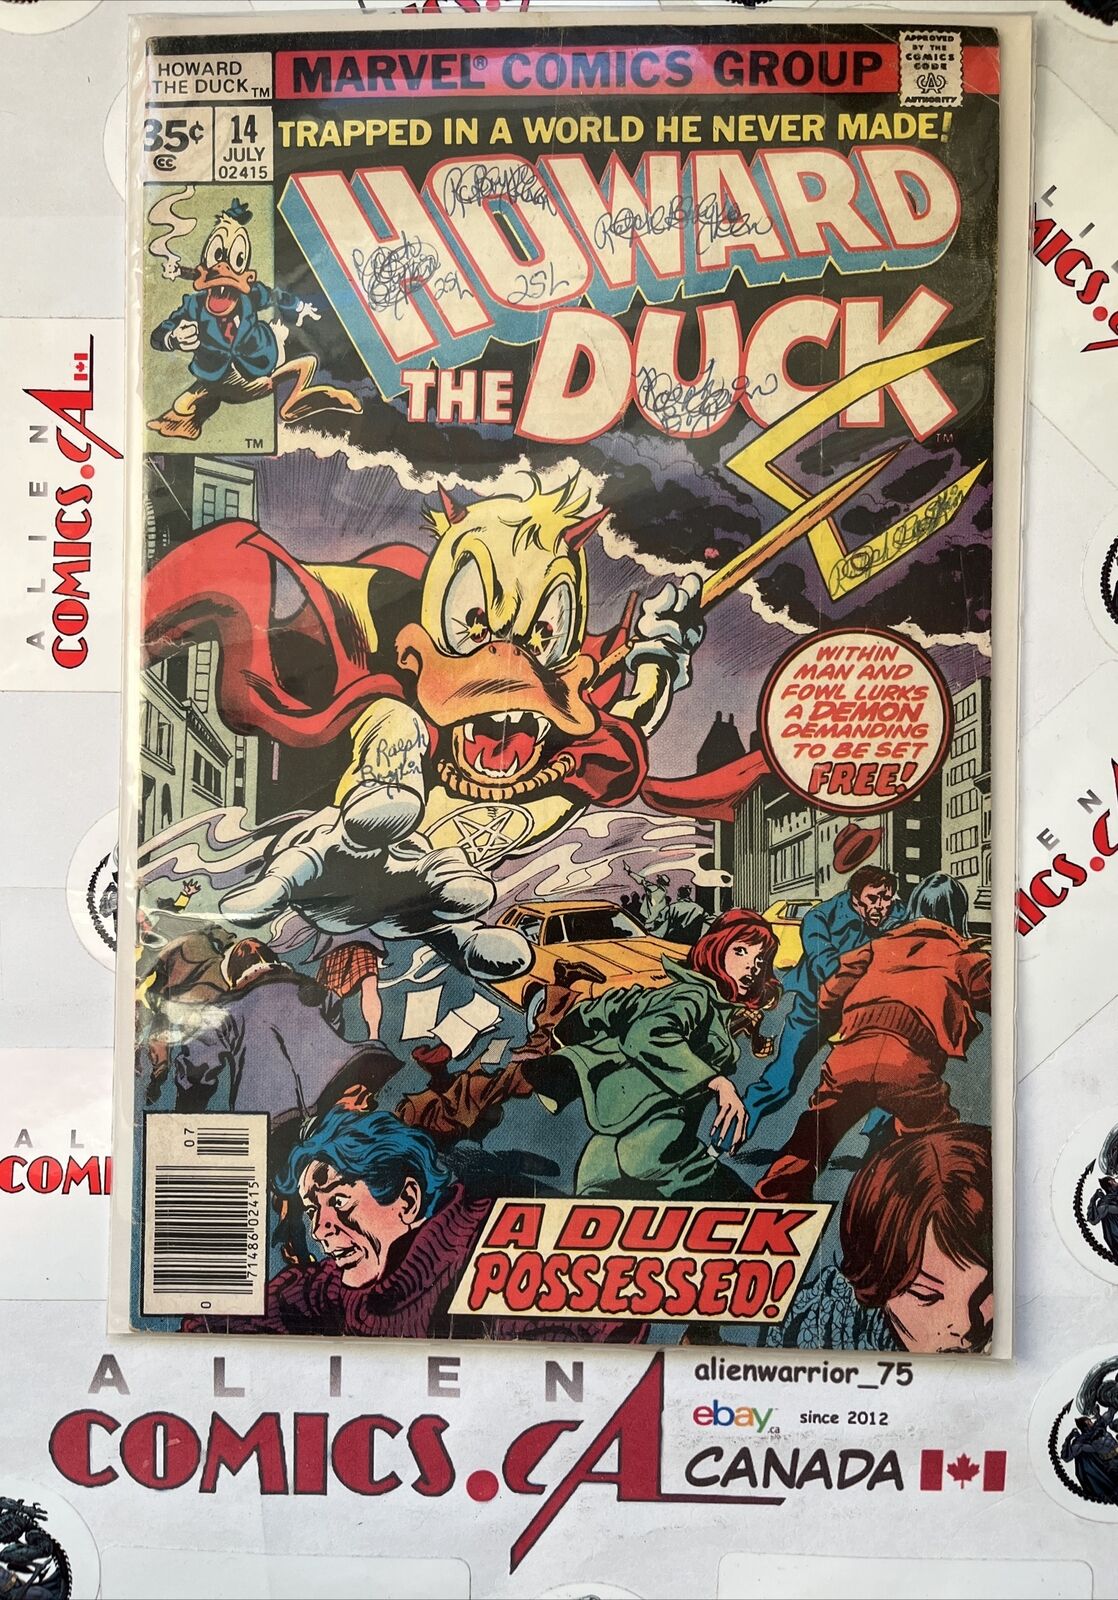 HOWARD THE DUCK 14 35¢ price variant Marvel Comics 1977 Low Distribution SCARCE